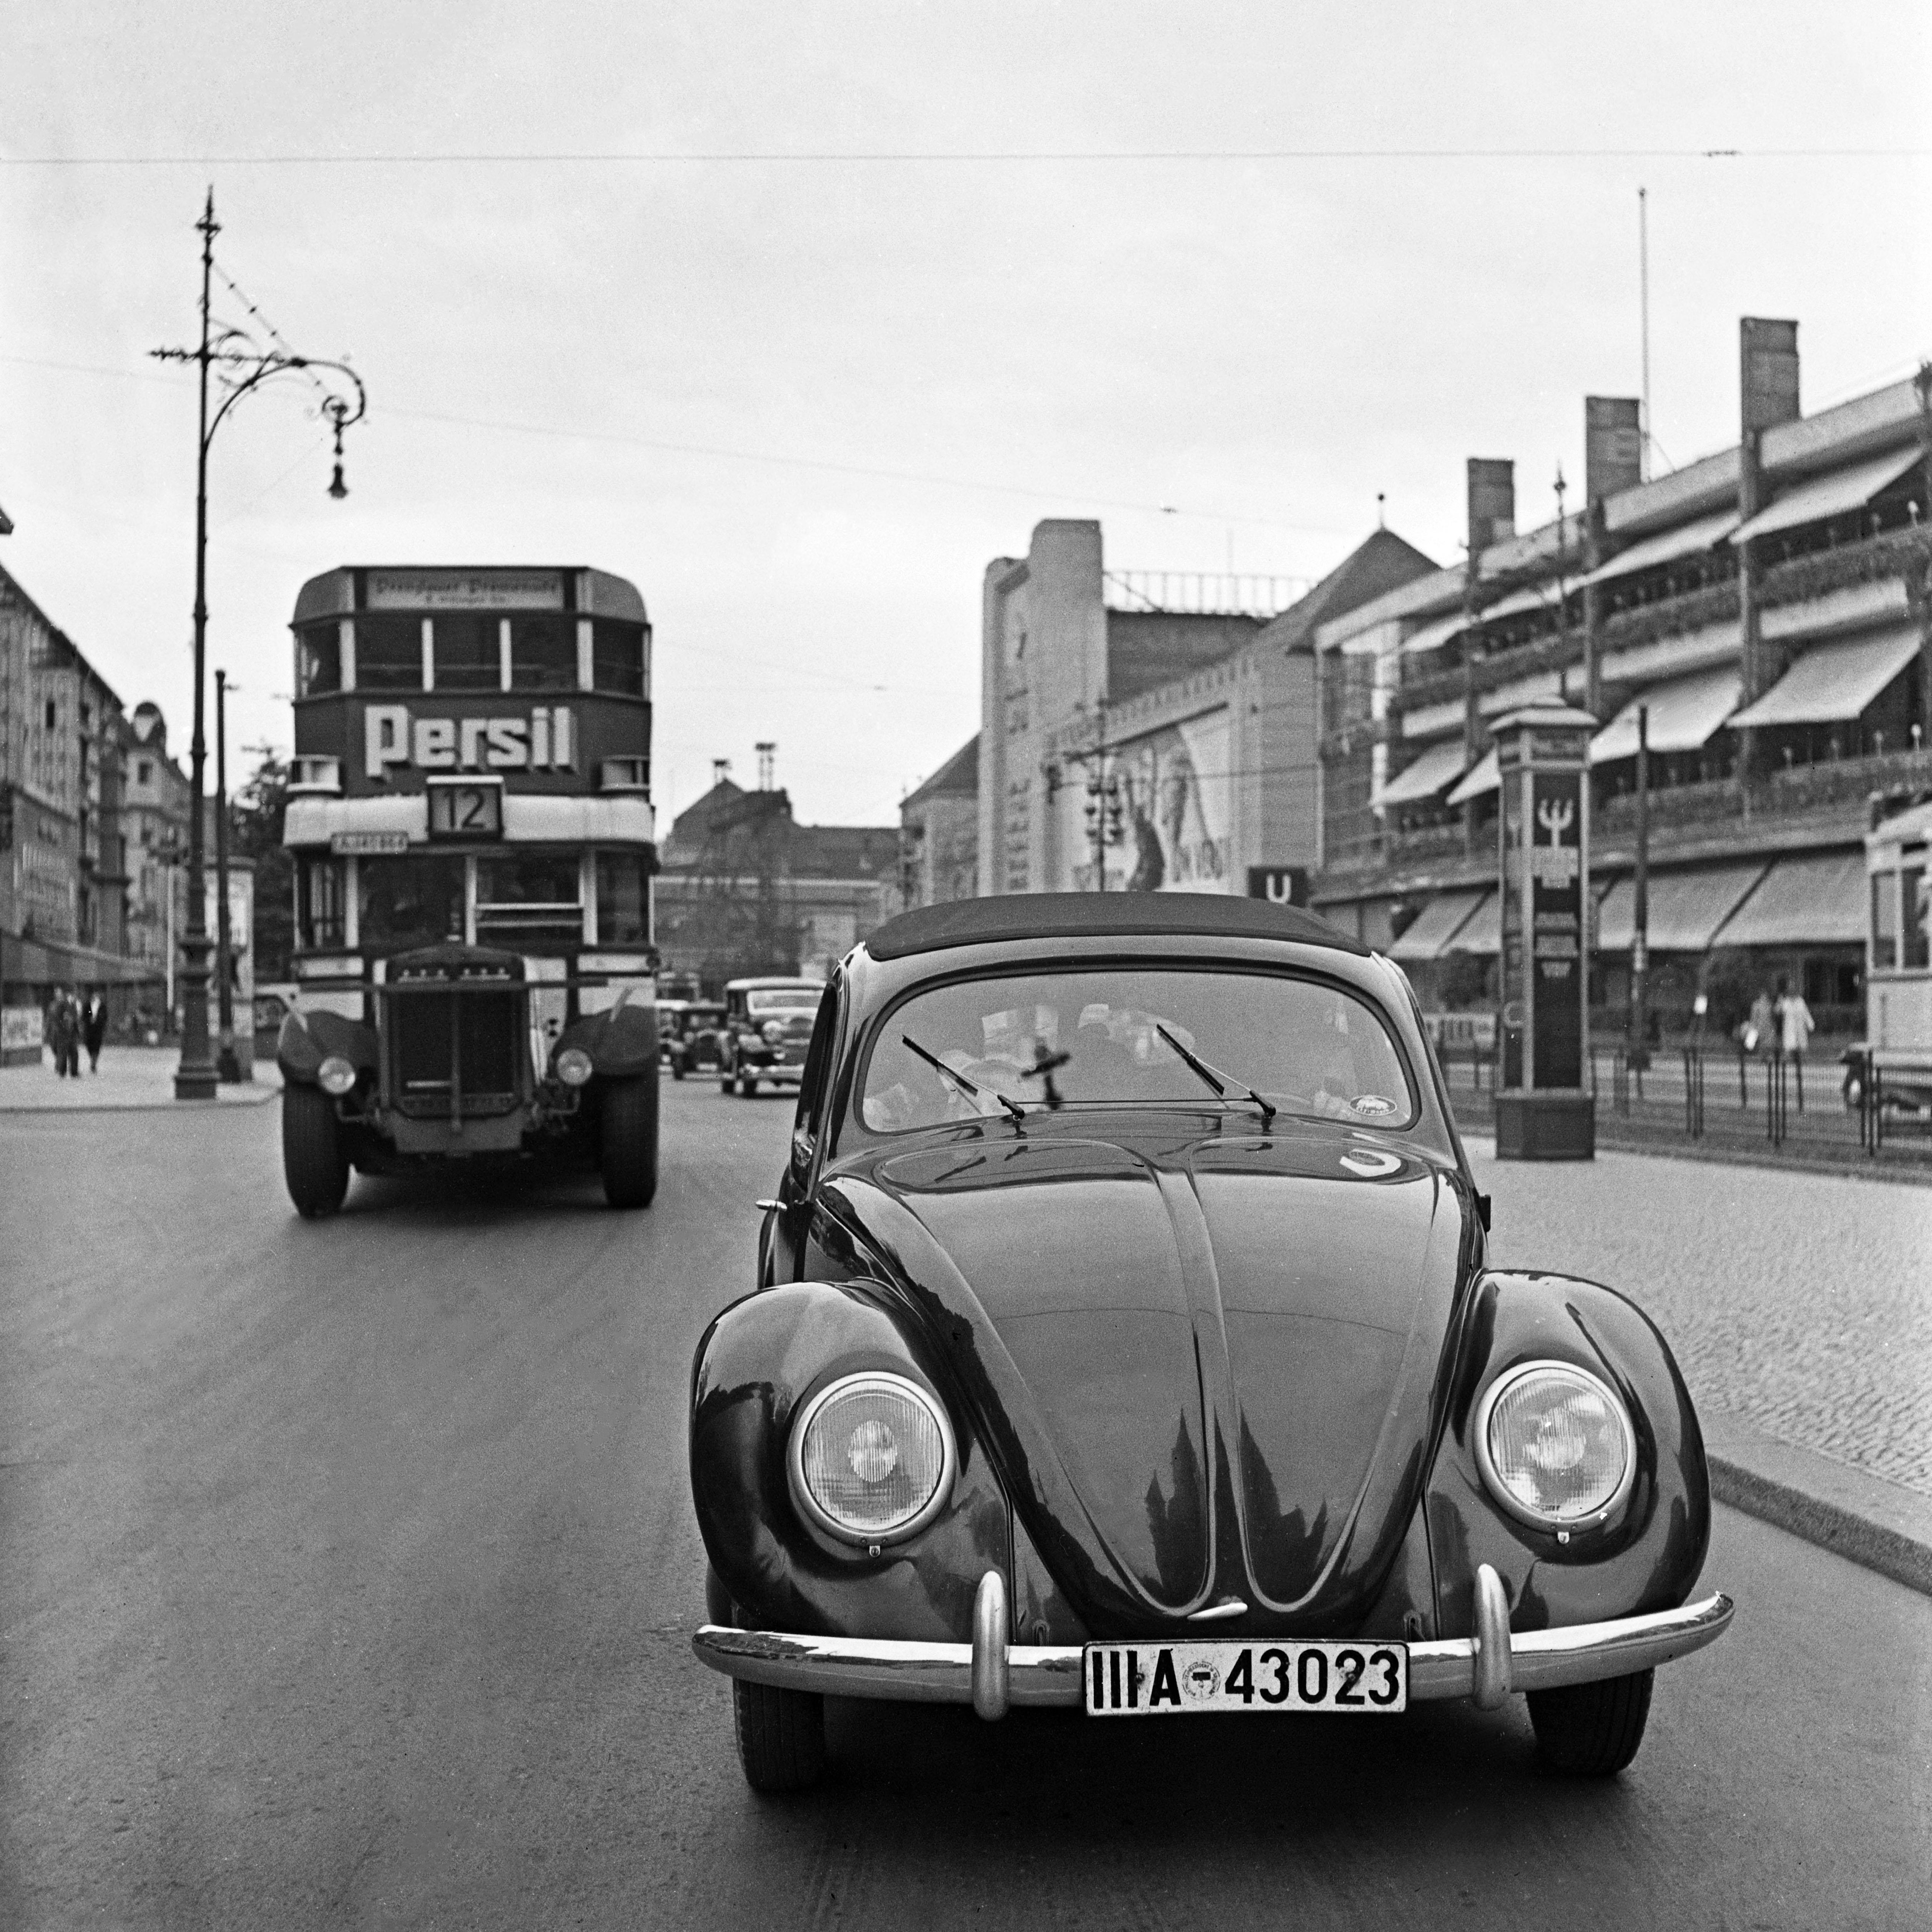 Karl Heinrich Lämmel Black and White Photograph - Volkswagen beetle on the streets in Berlin, Germany 1939 Printed Later 